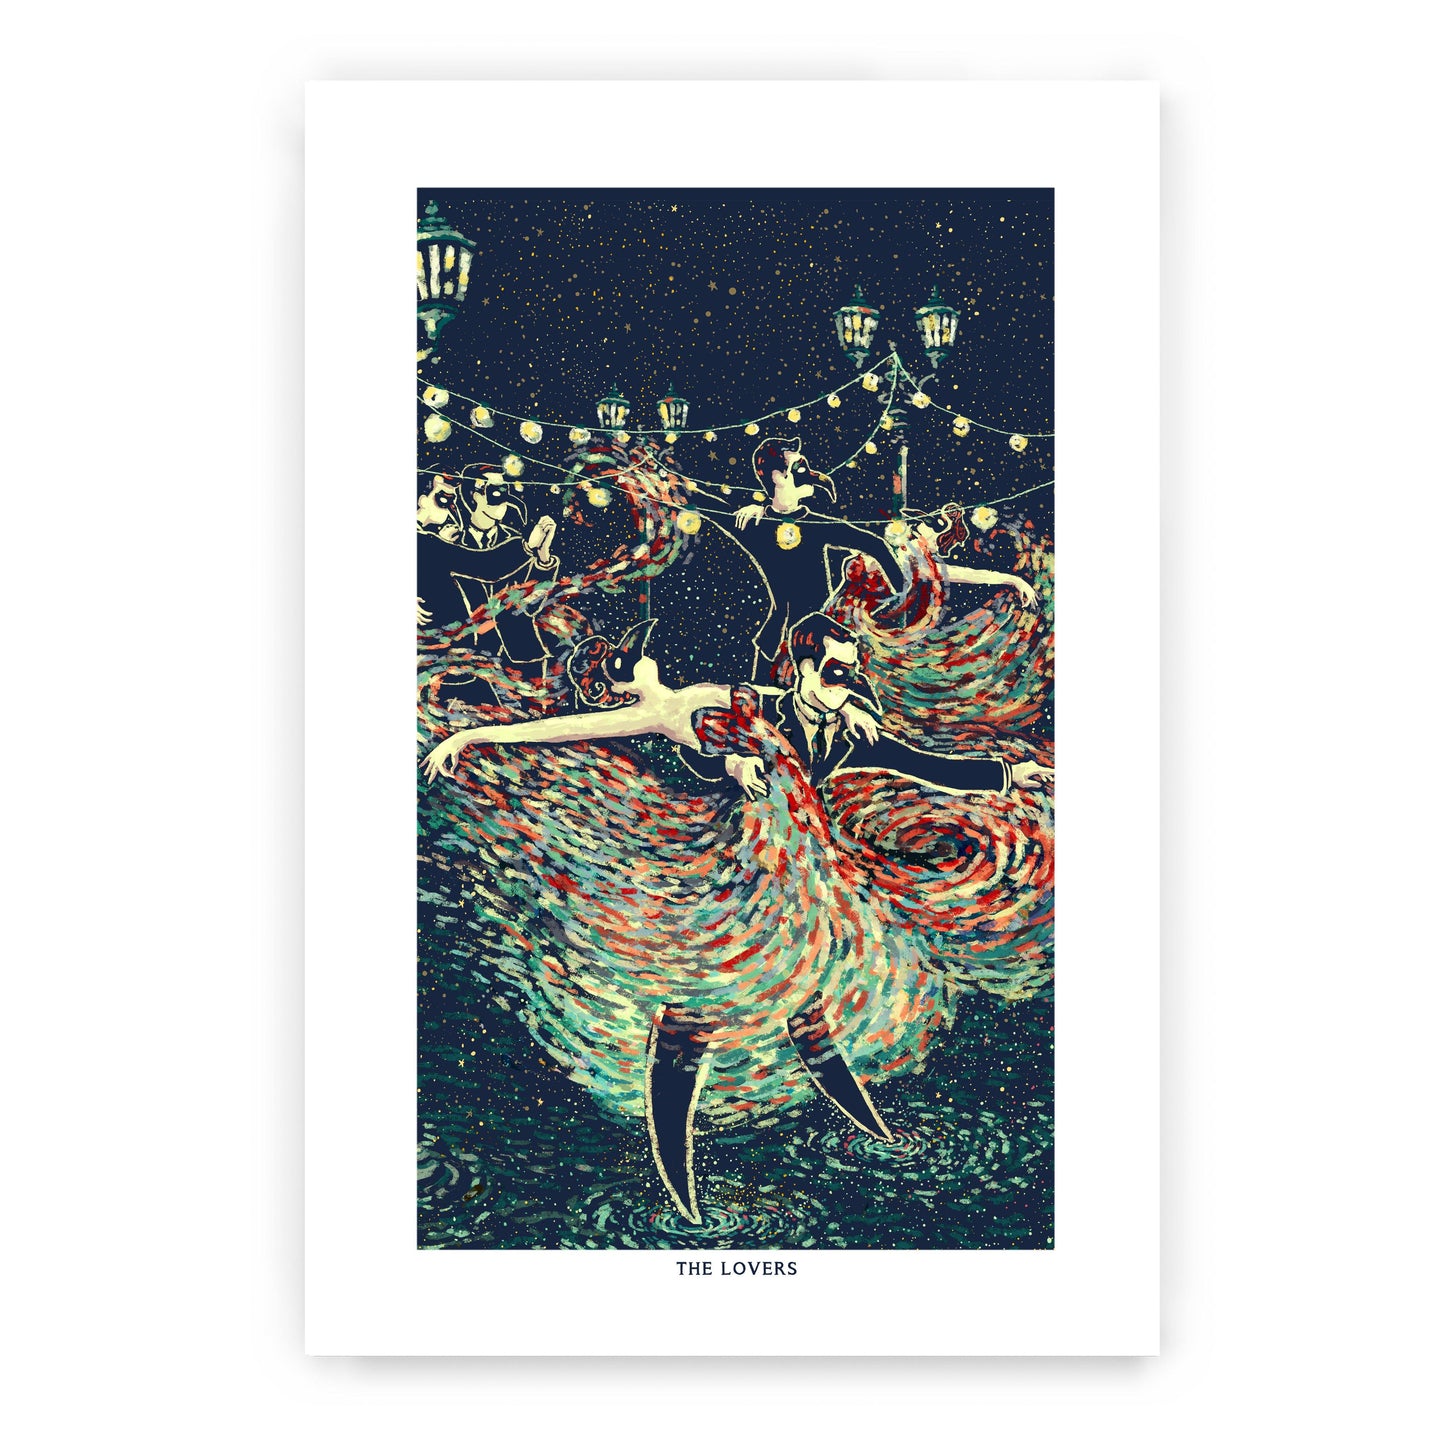 The Lovers (AP Edition) Print James R. Eads 